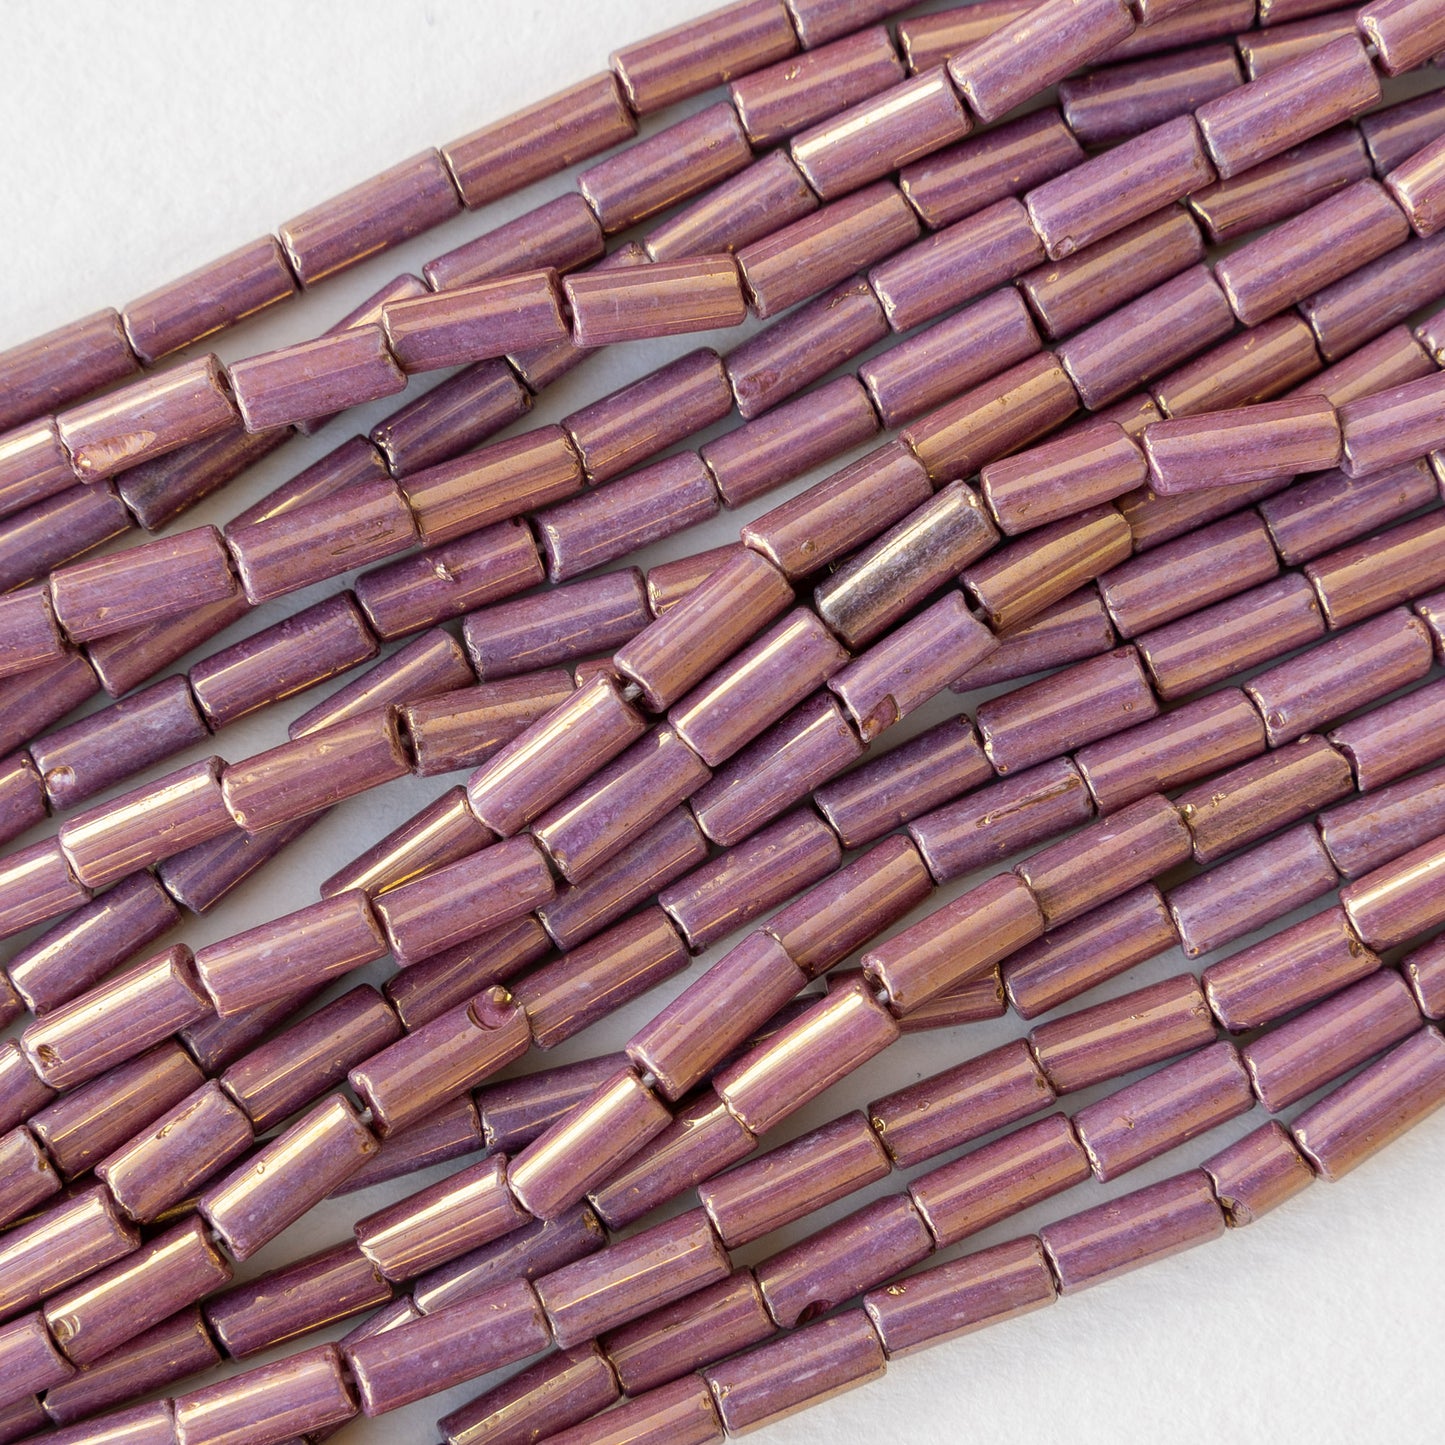 9x4mm Glass Tube Beads - Lilac Luster - 20 or 60 Inches